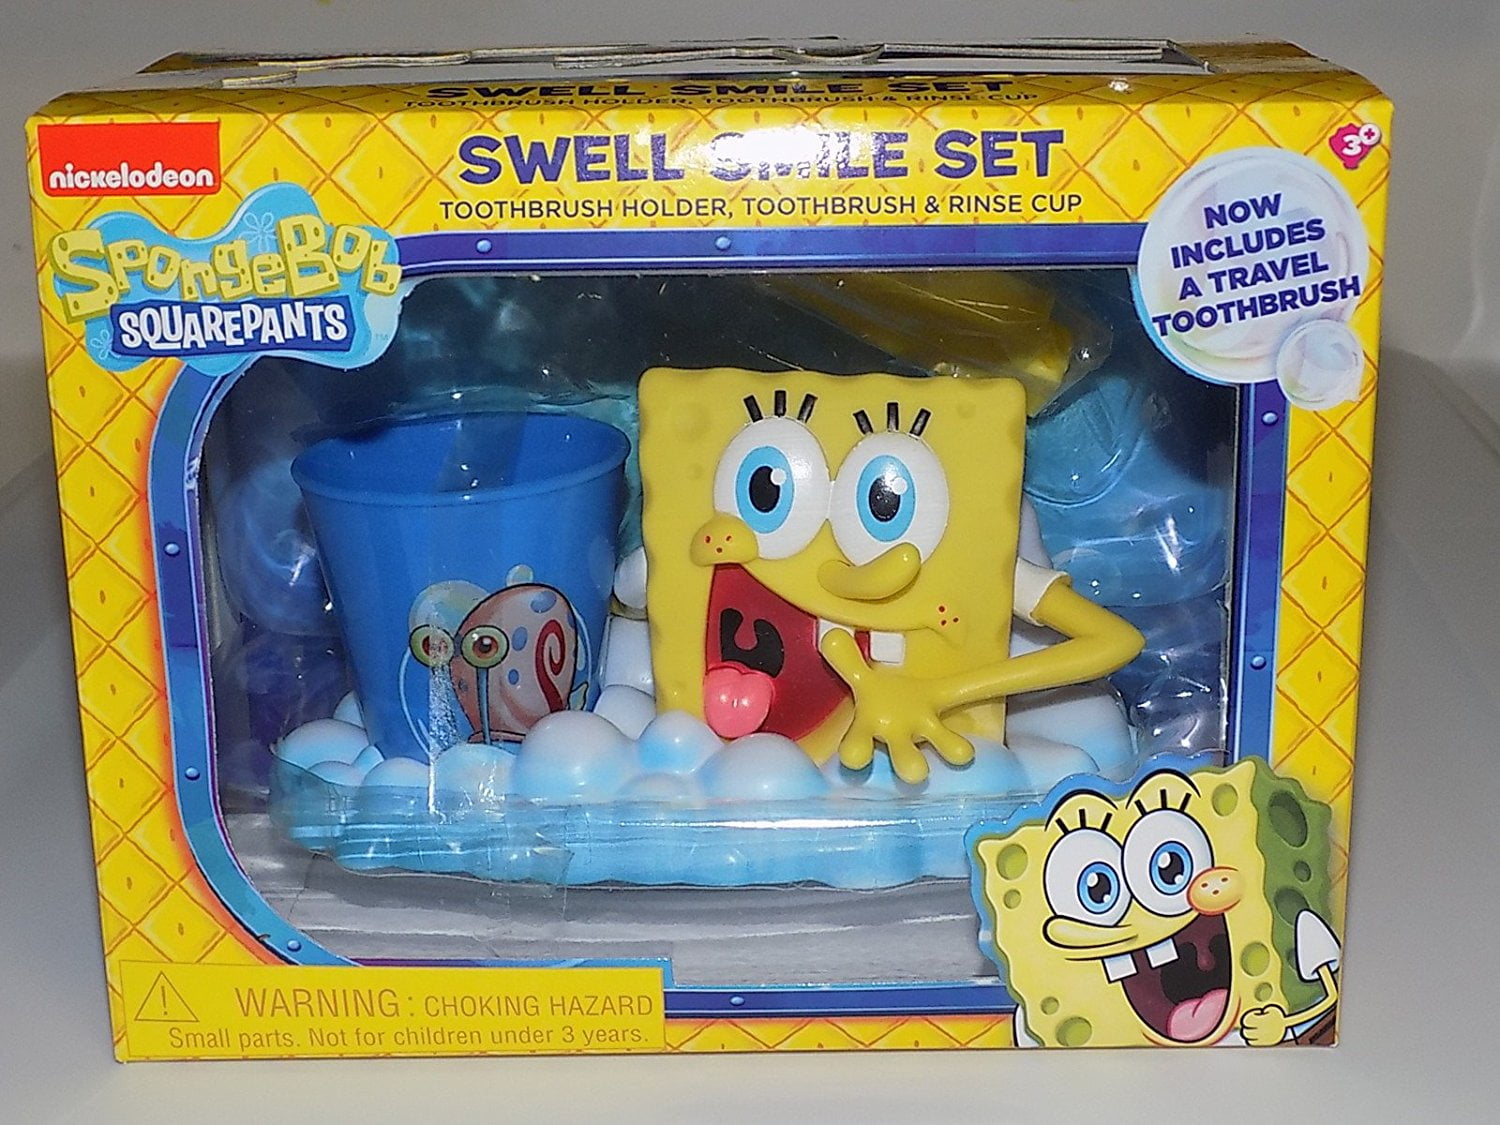 Swell Smile Set Toothbrush And Holder With Mini Cup Spongebob 